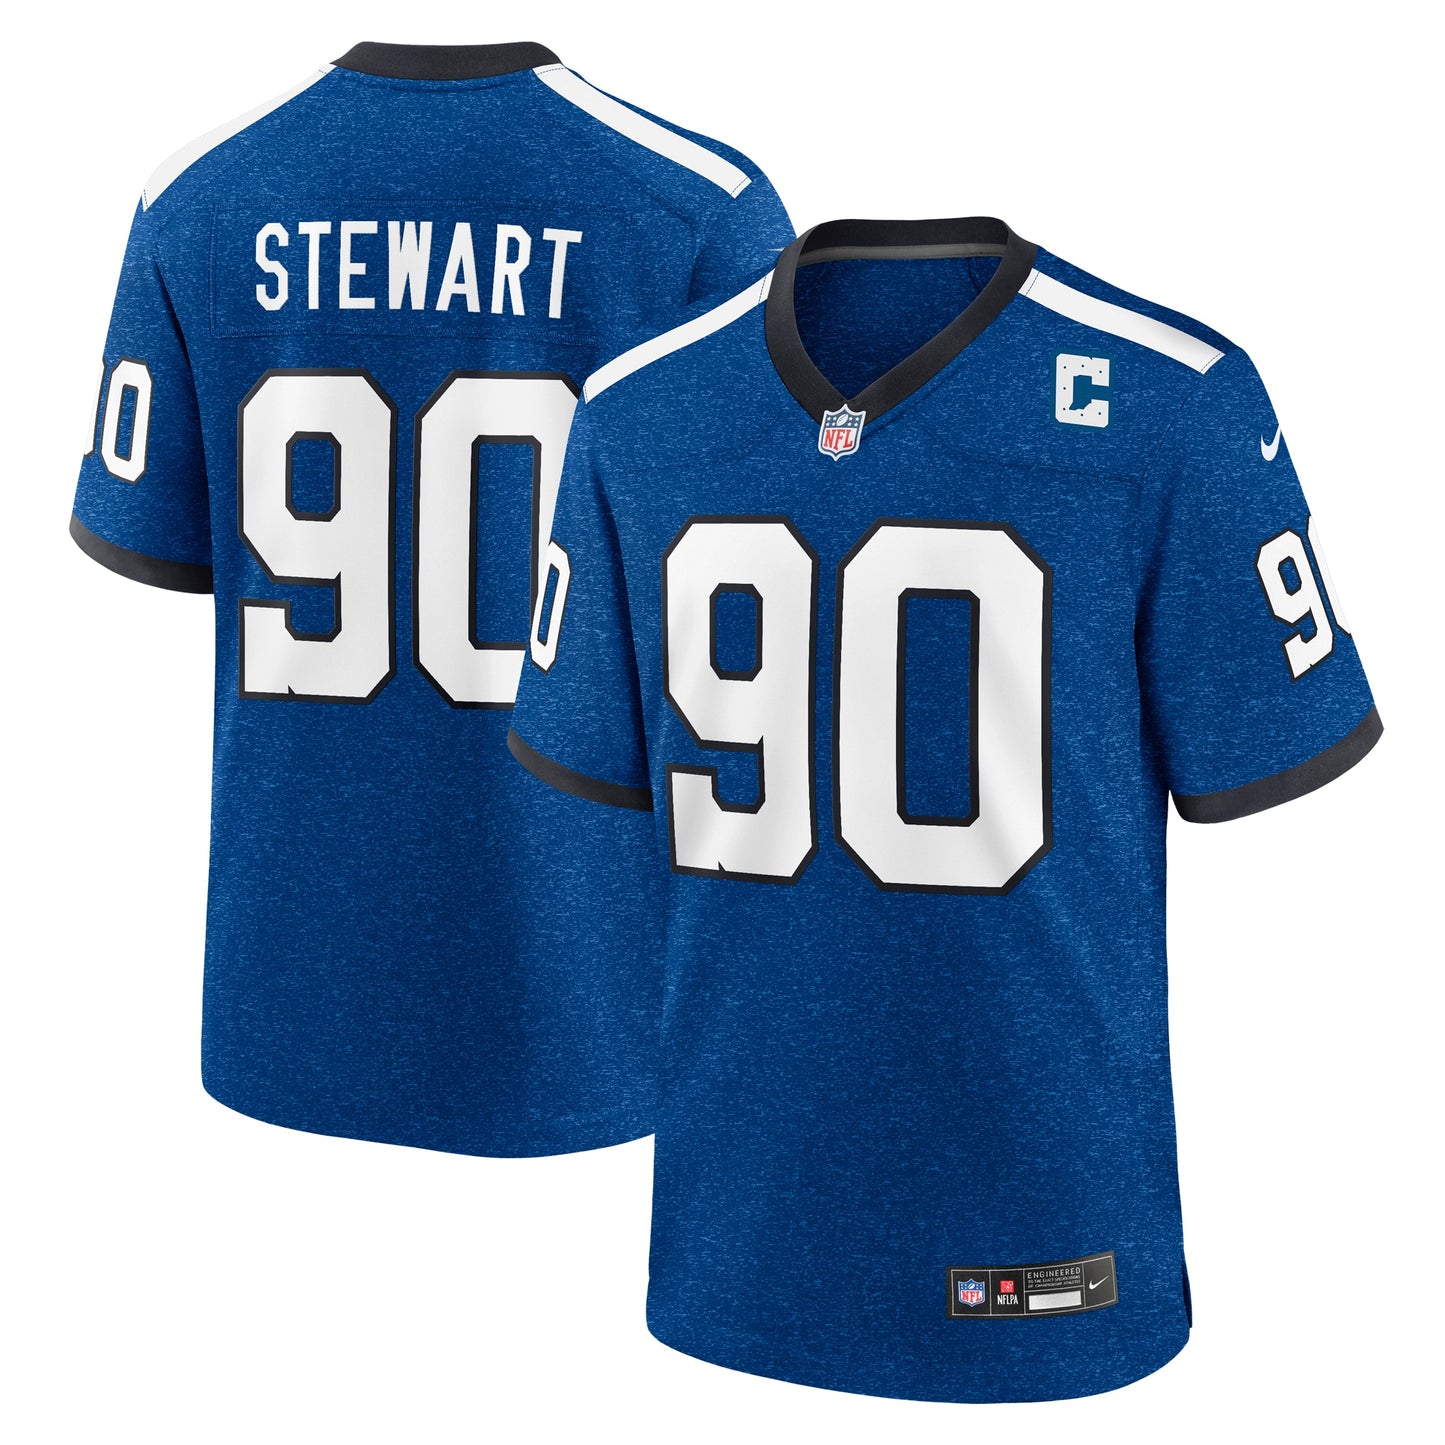 Grover Stewart Indianapolis Colts Nike Indiana Nights Alternate Game Jersey - Royal